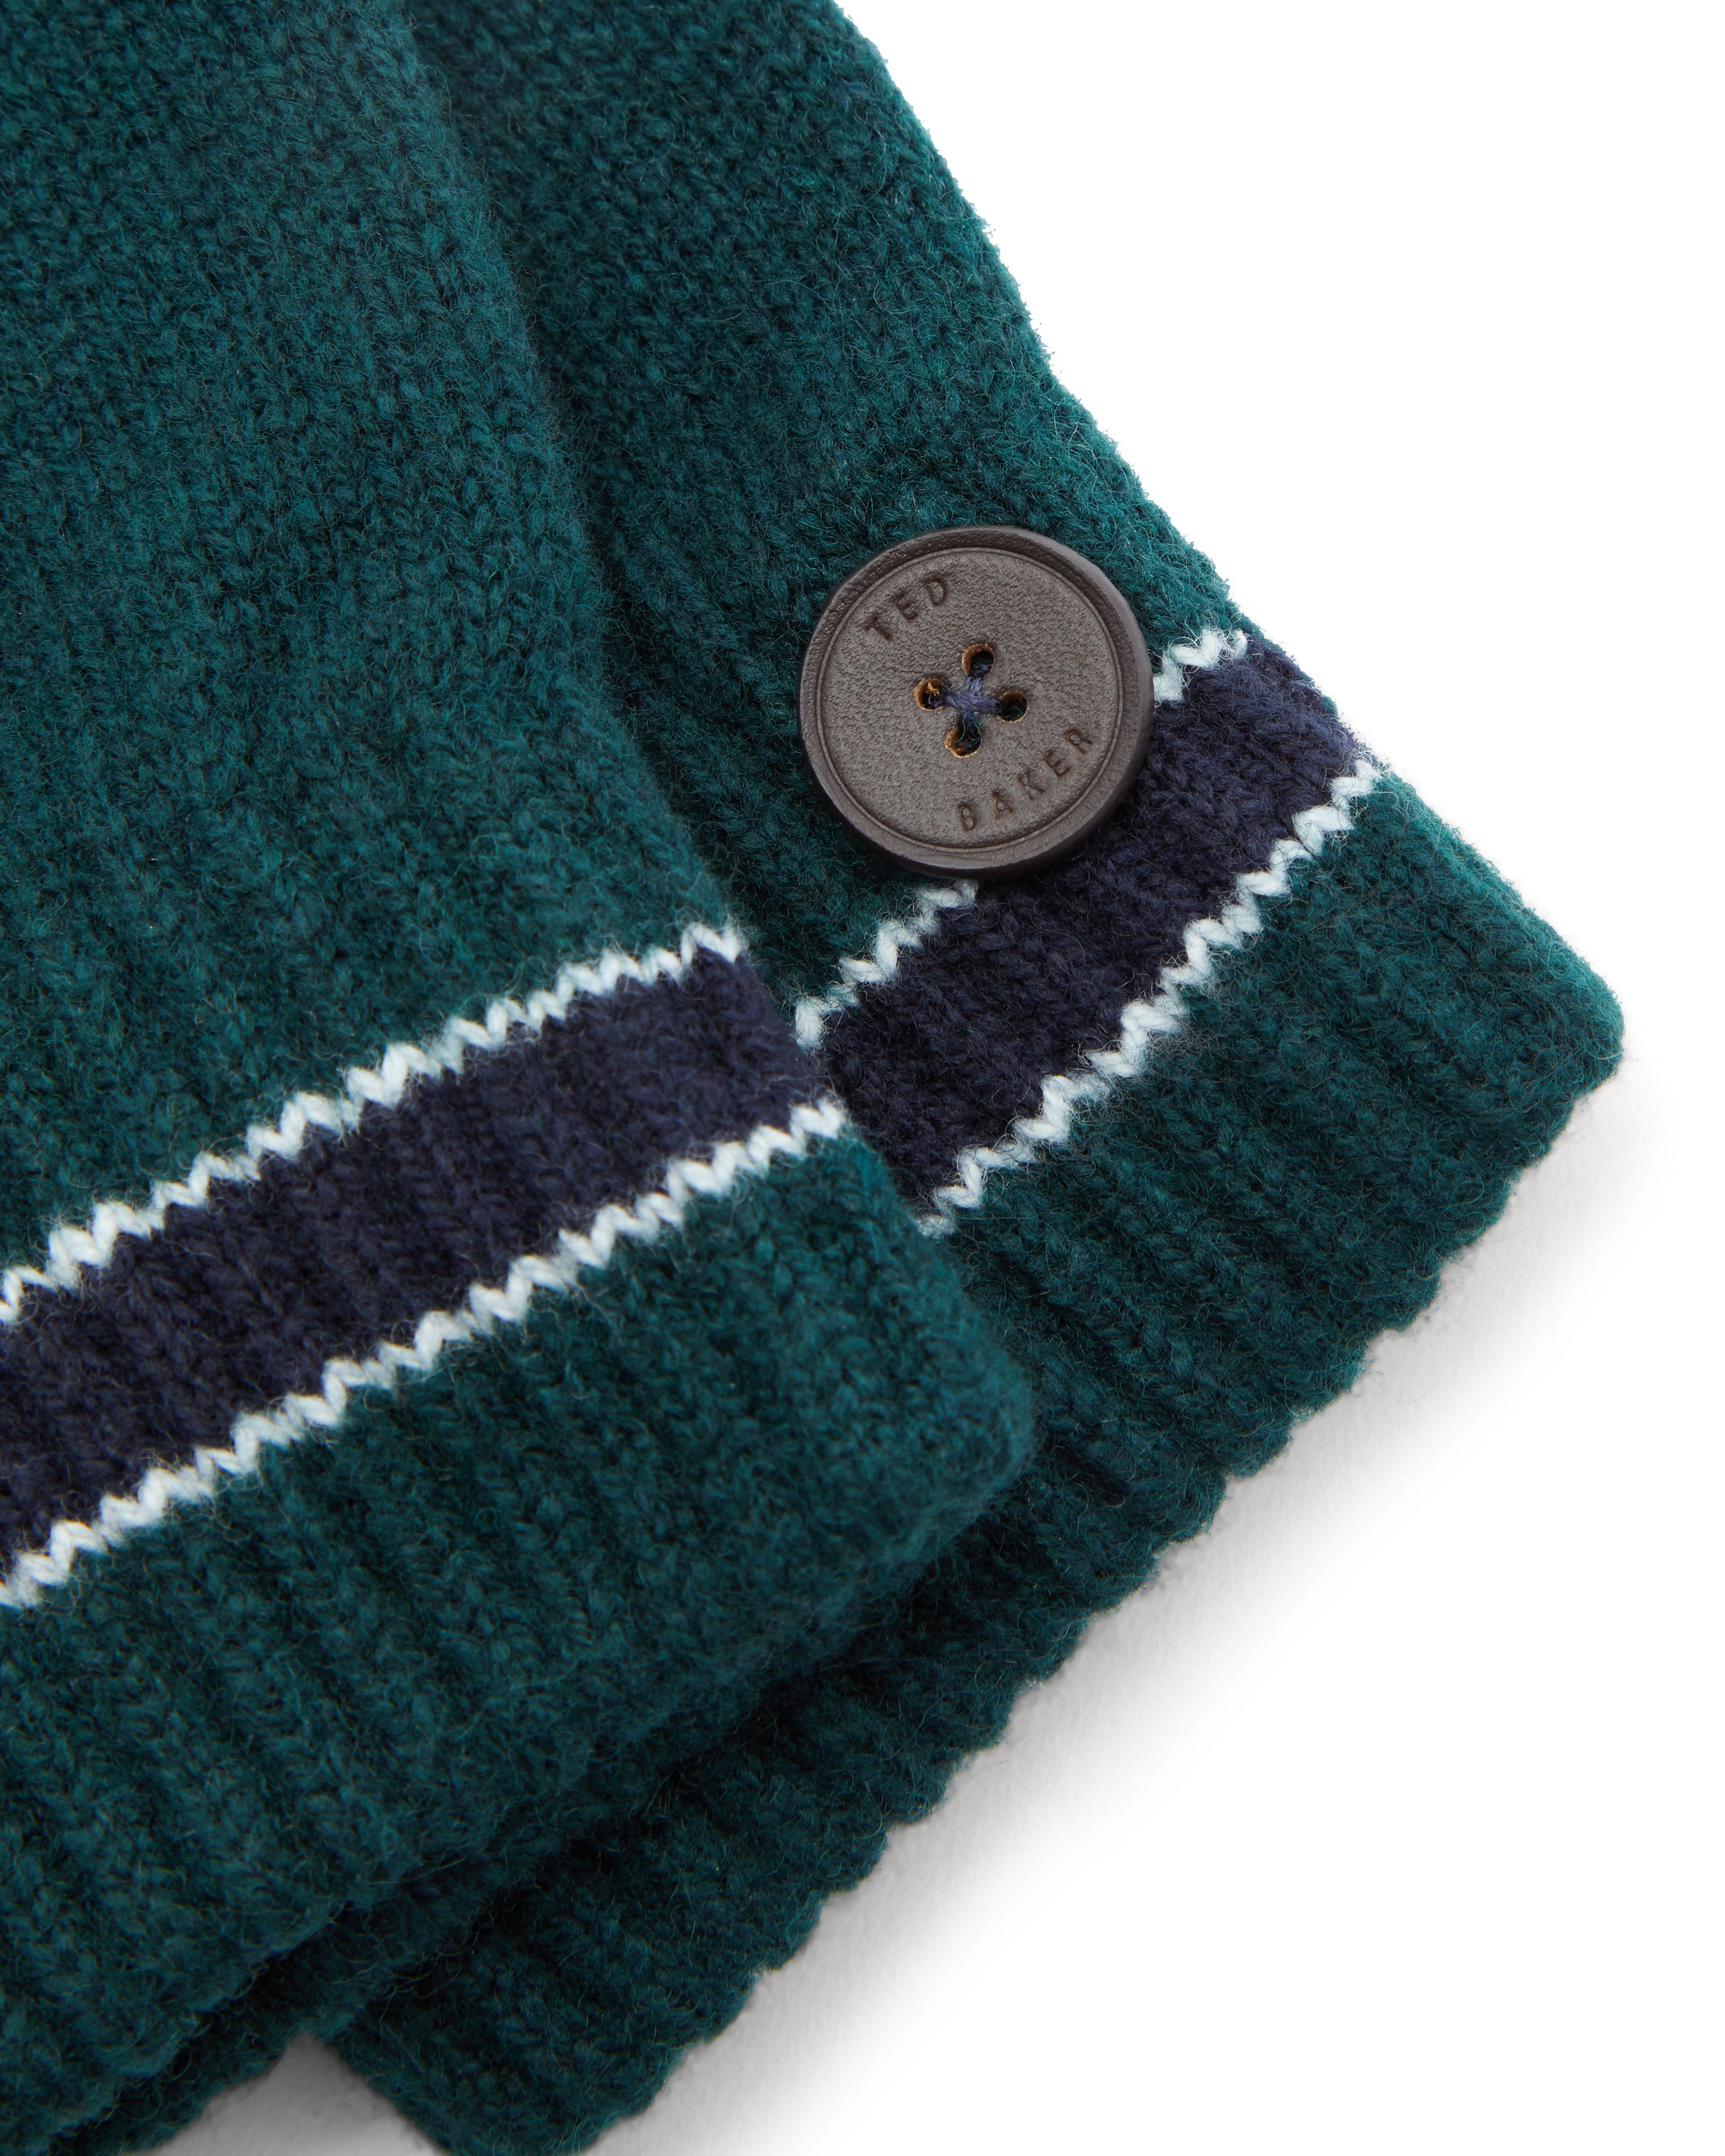 Ted Baker Pairs Stripe Cuff Knitted Gloves, Teal Blue